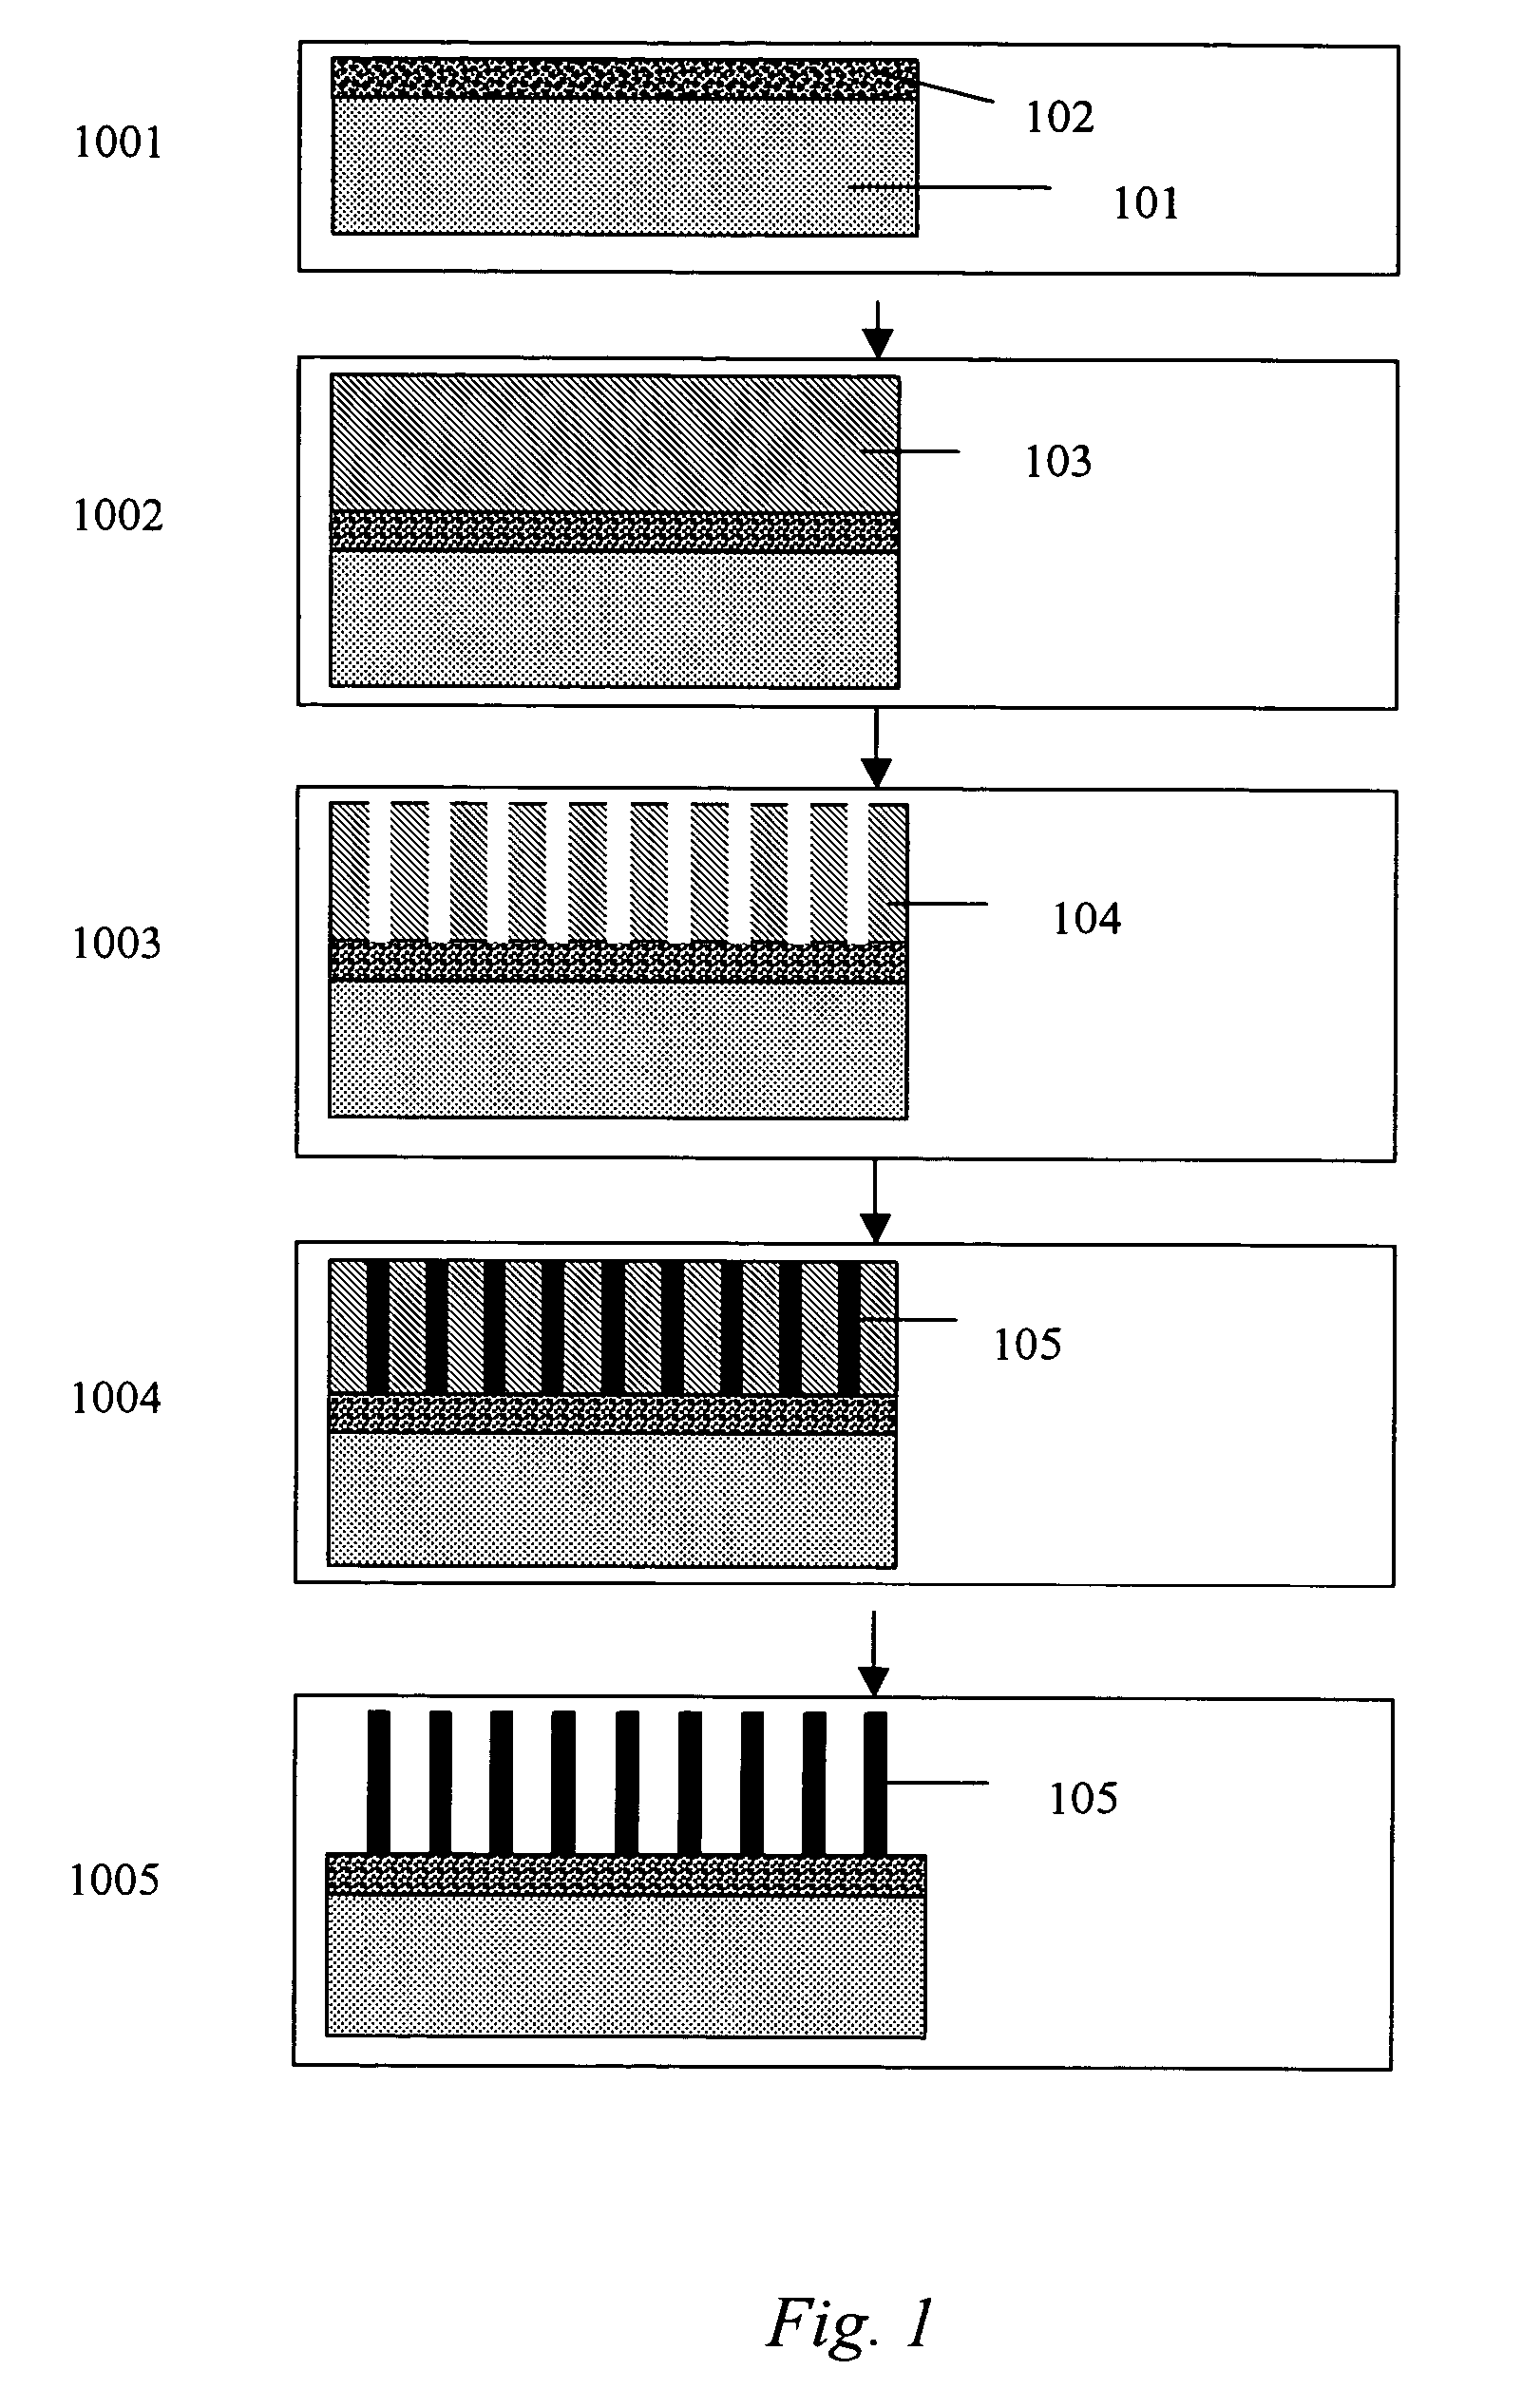 Monolithic light emitting devices based on wide bandgap semiconductor nanostructures and methods for making same